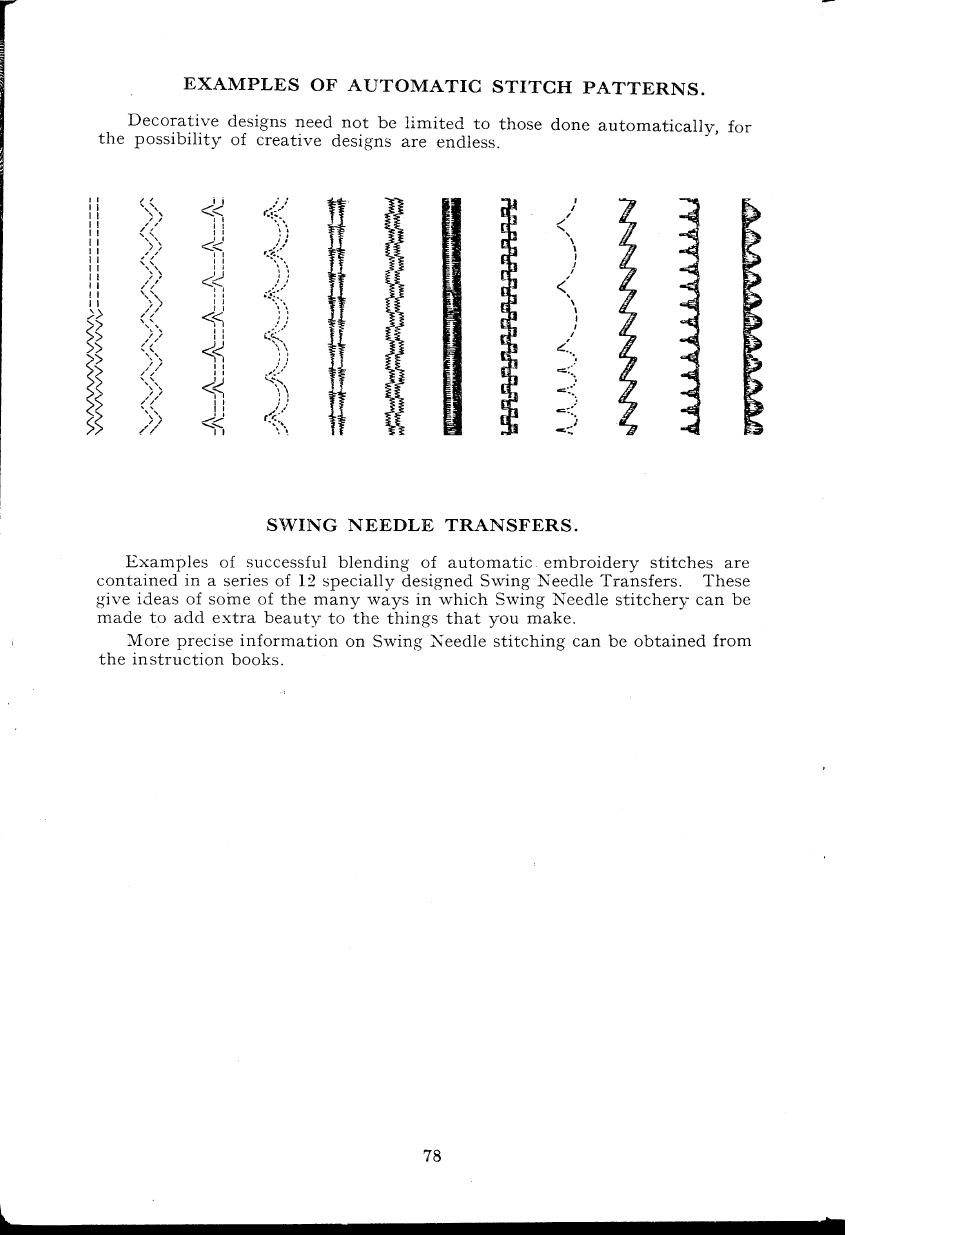 Swing needle transfers, Examples of automatic stitch patterns | SINGER 404K User Manual | Page 78 / 78